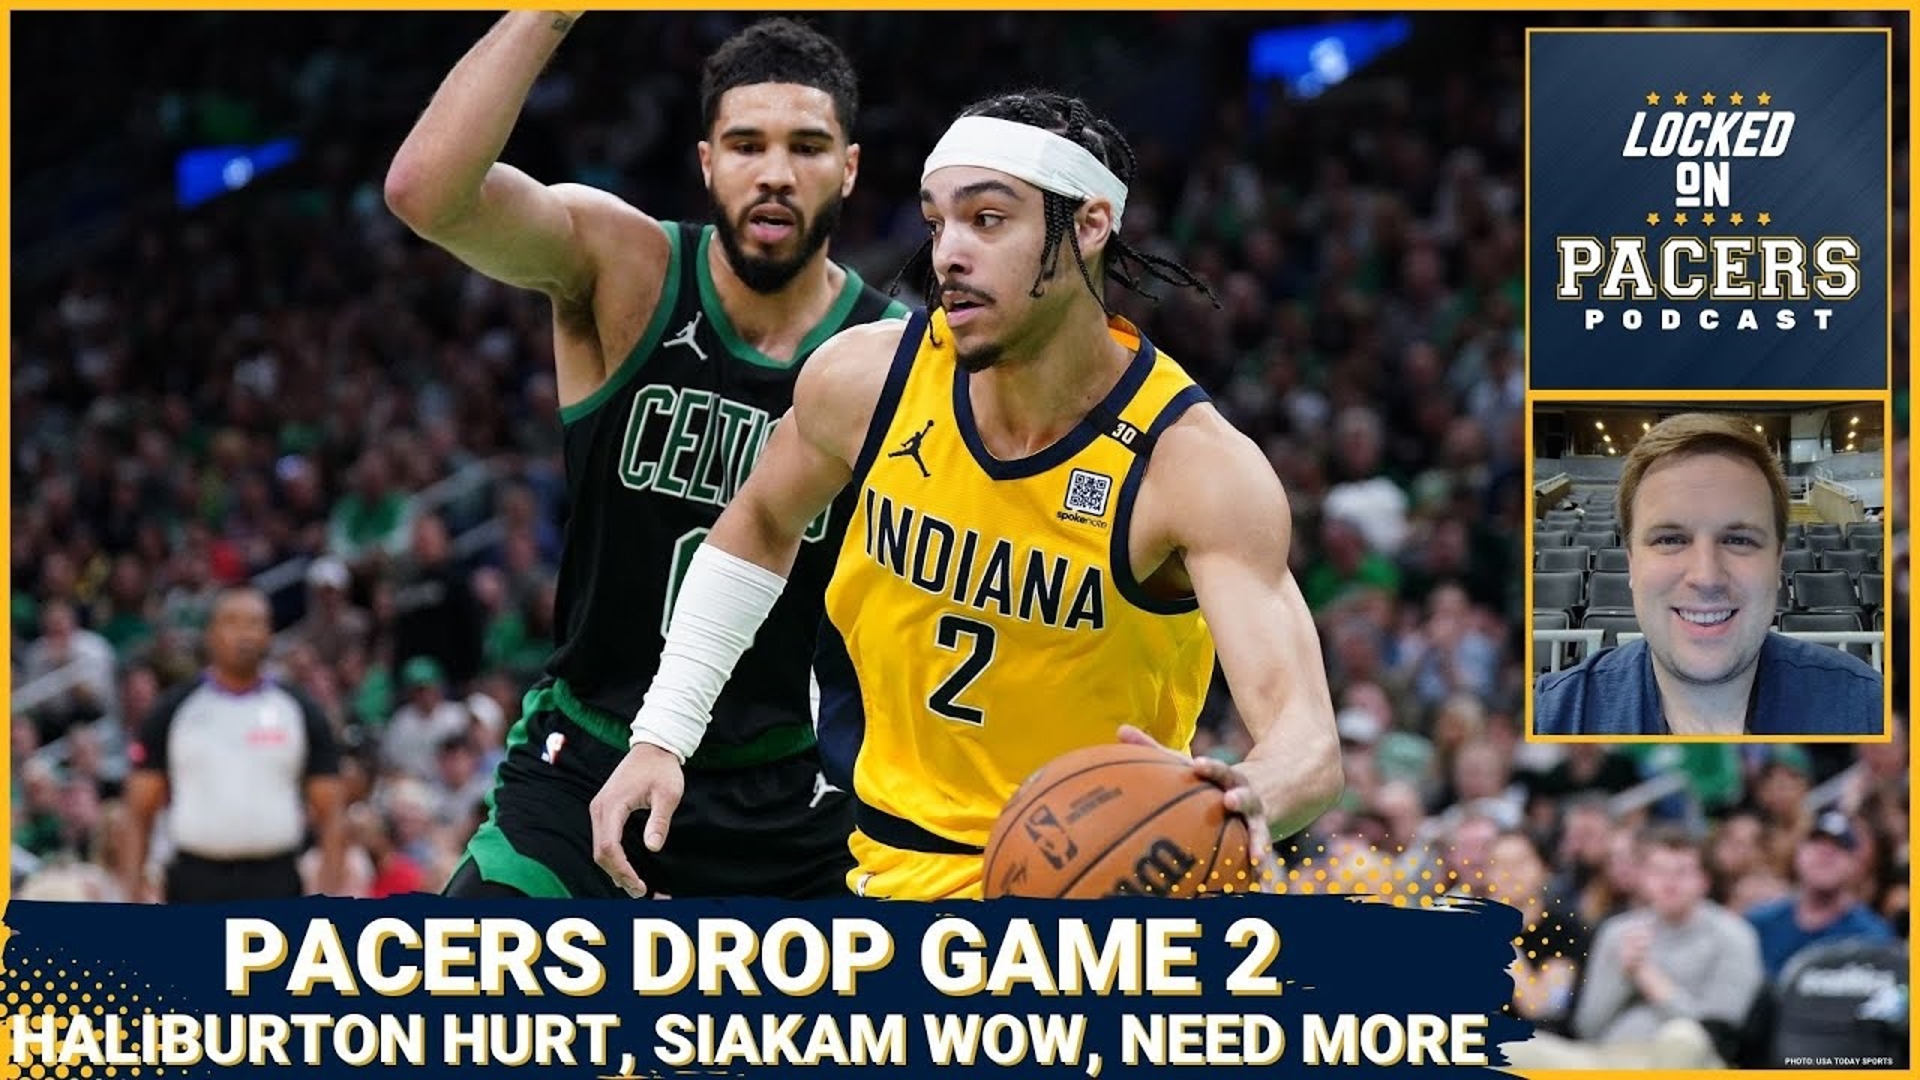 Indiana Pacers star guard Tyrese Haliburton got injured Thursday night and the Pacers were thumped by the Boston Celtics in Game 2.